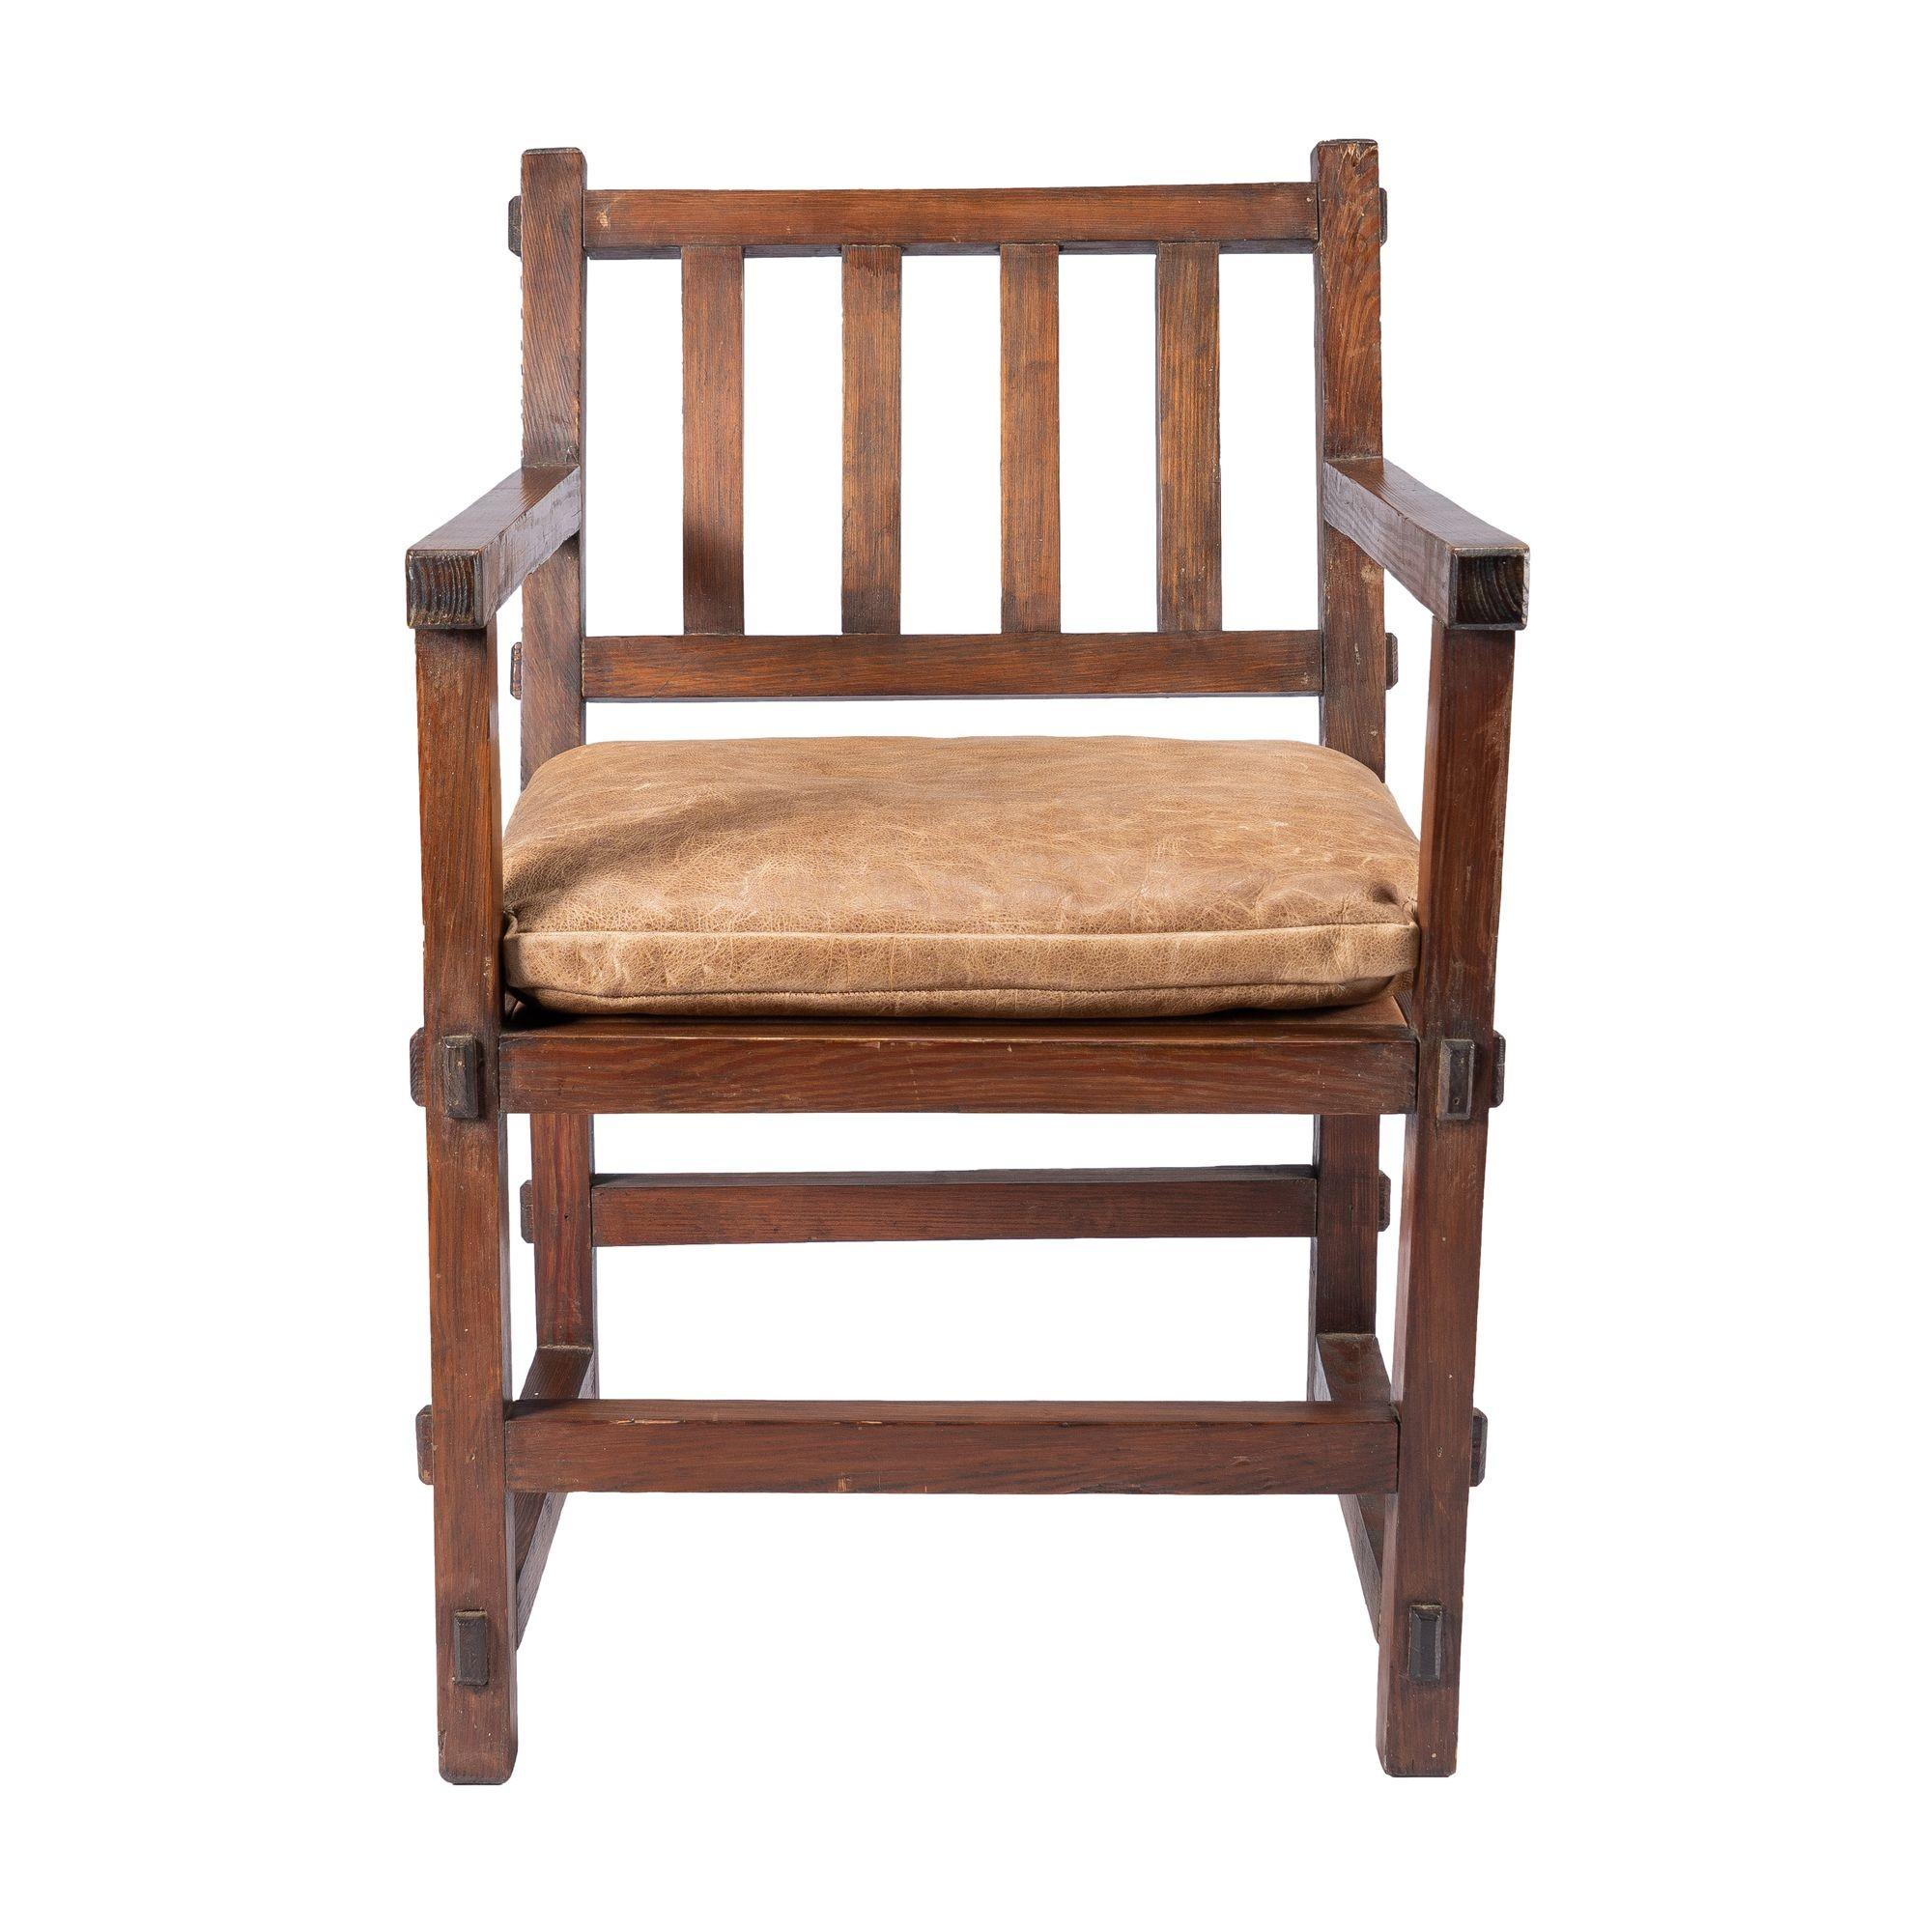 American Arts & Crafts armchair of stained hard yellow pine with leather upholstered seat. The frame is constructed entirely of 2” x 2” elements with mortice and thru tenons. Note the exposed and beveled tenon ends used as a decorative element in